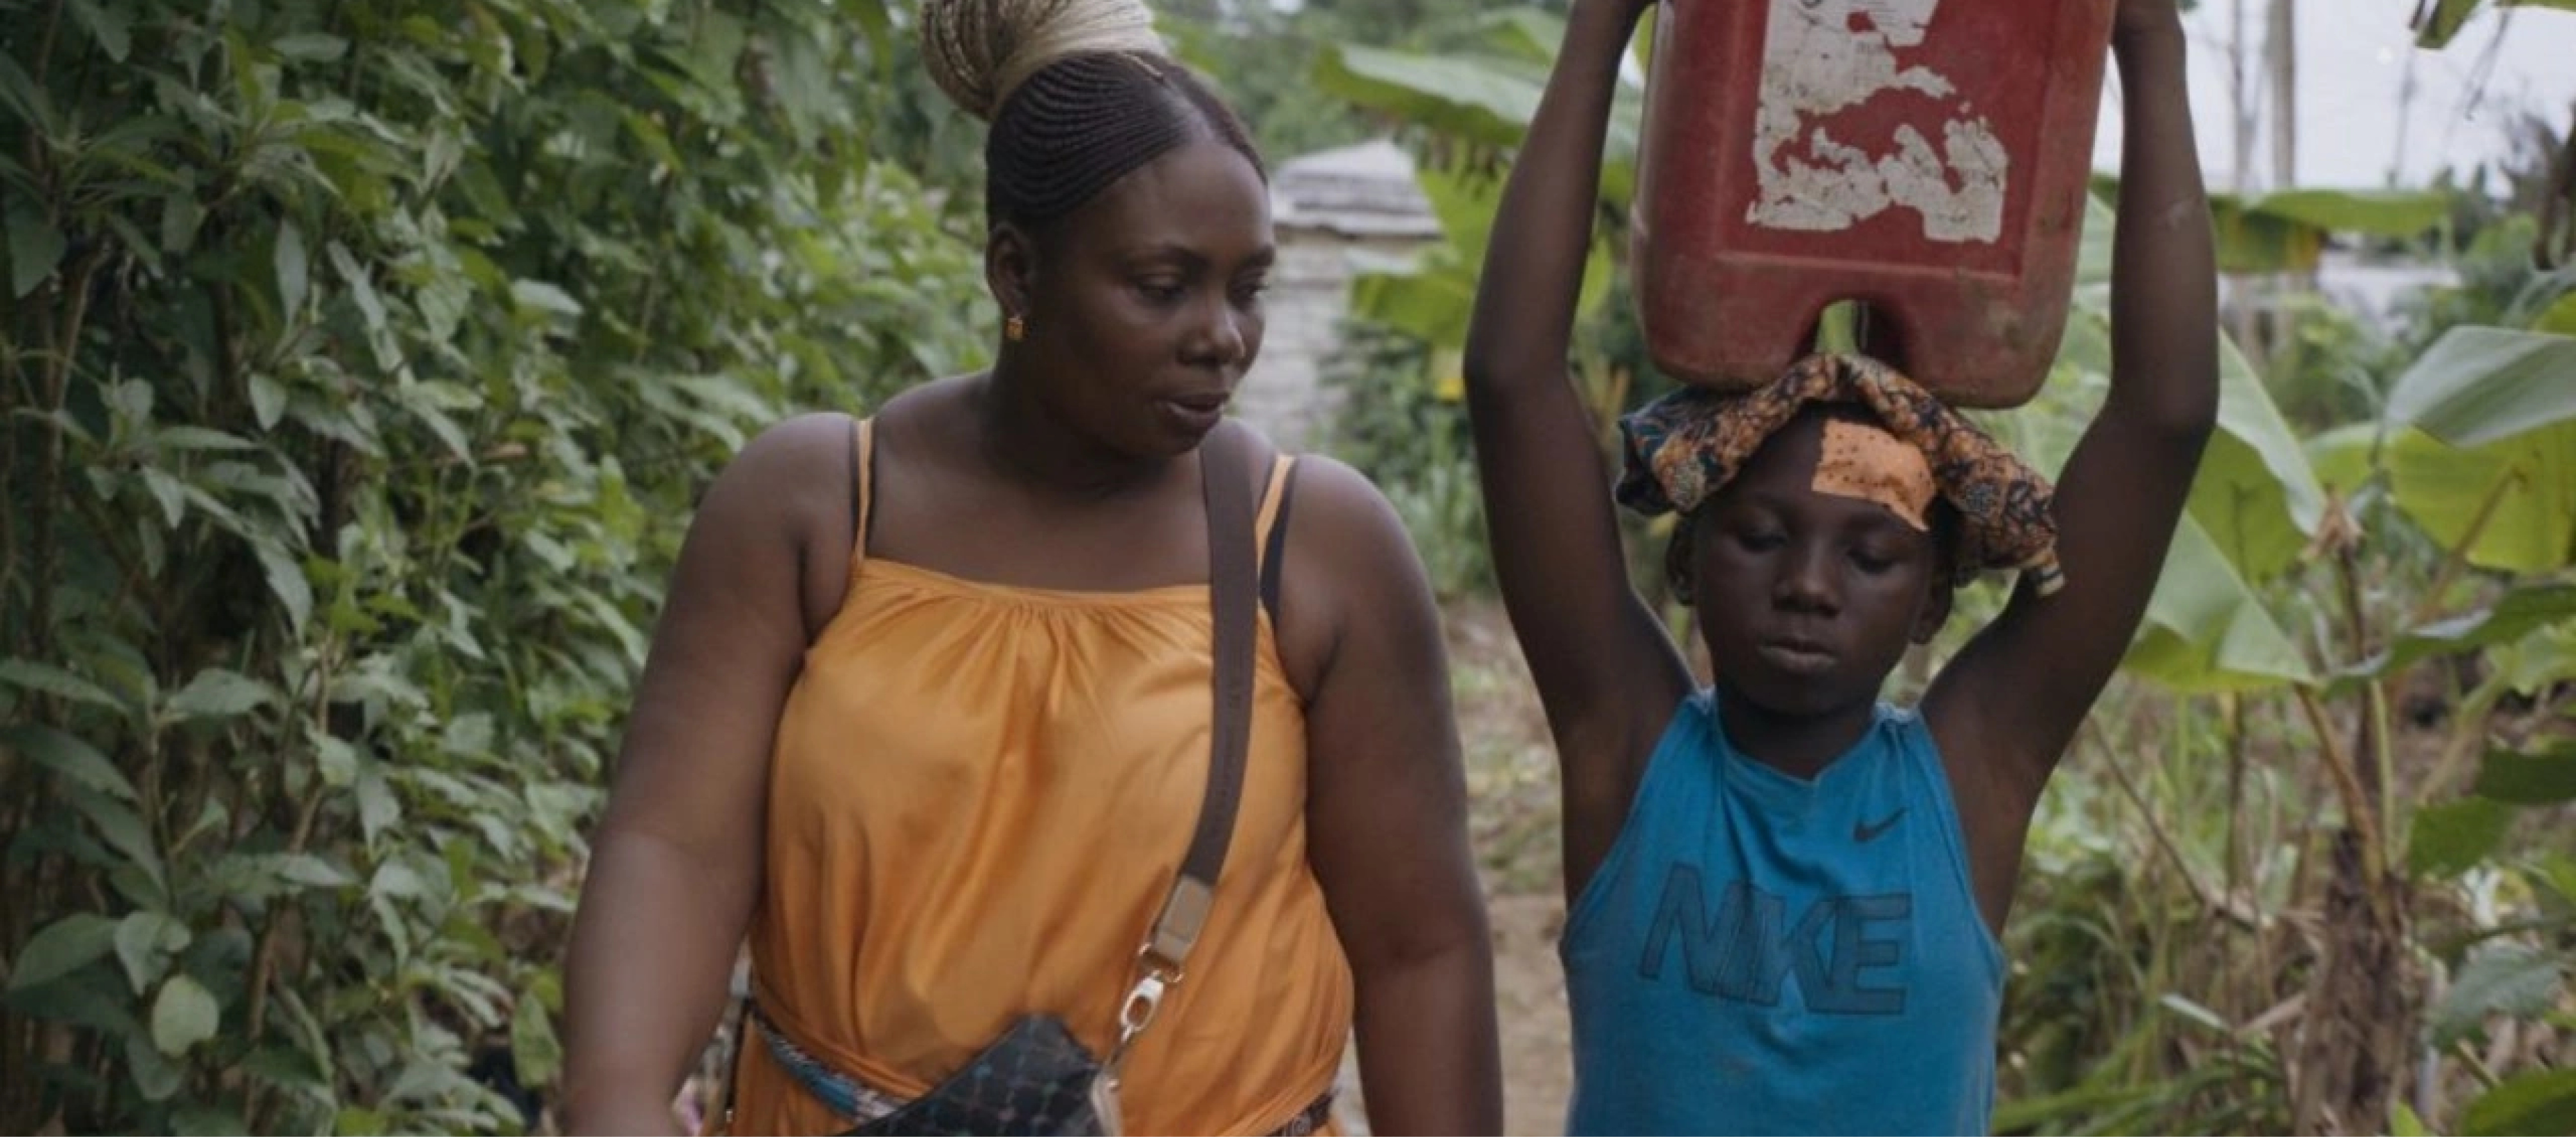 A Cameroonian woman wearing an orange dress walks on a path through a lush landscape next to a child who is holding a large red canister atop their head.